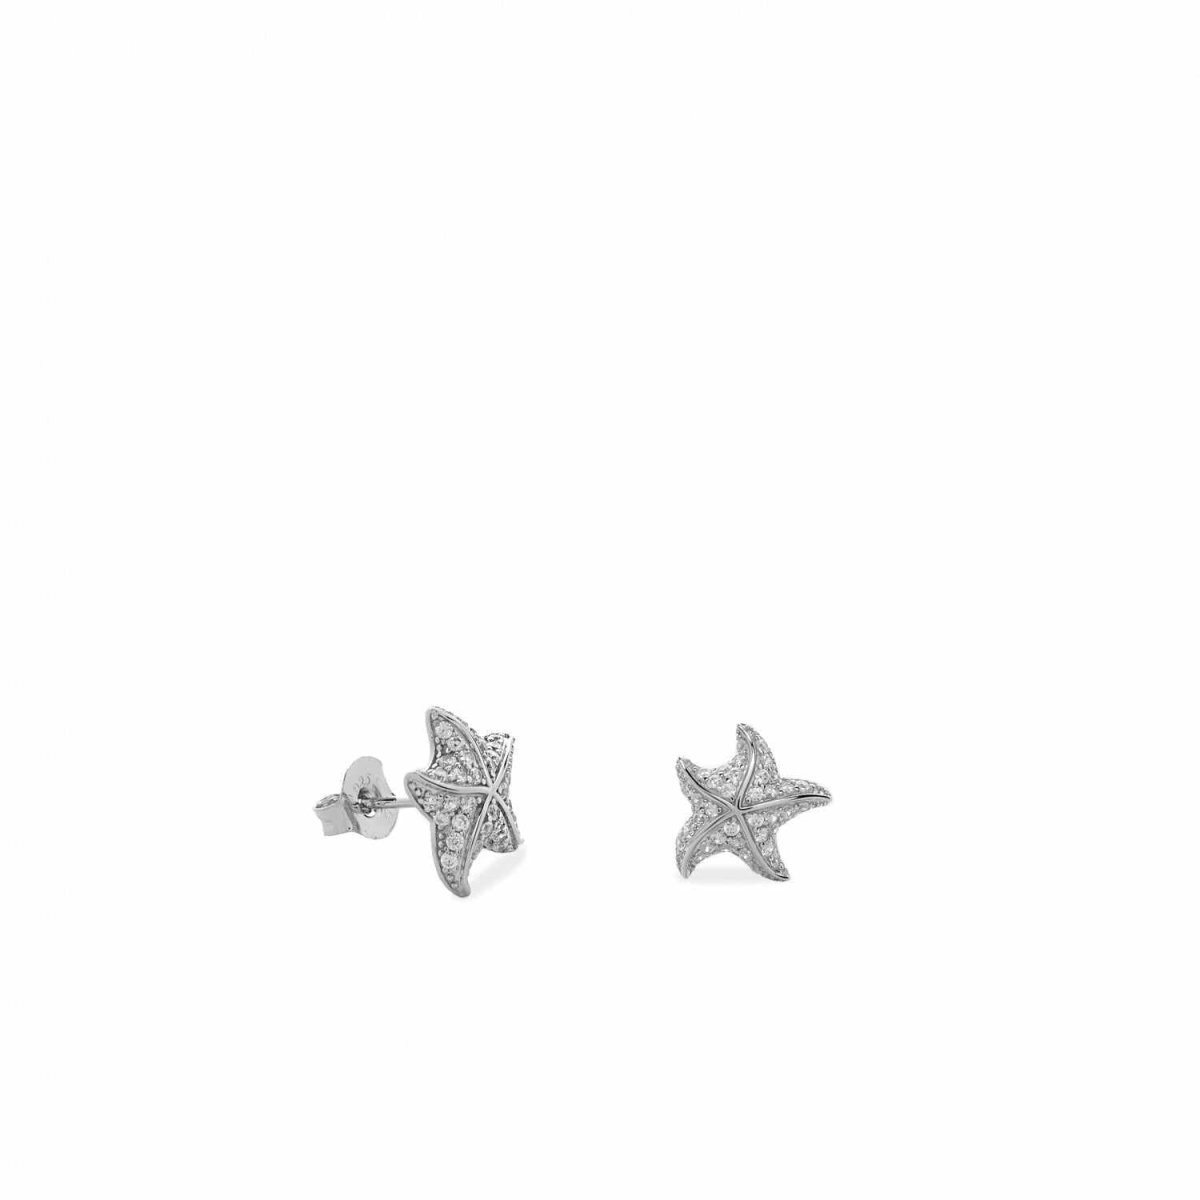 Earrings - Small silver earrings starfish design with zircons